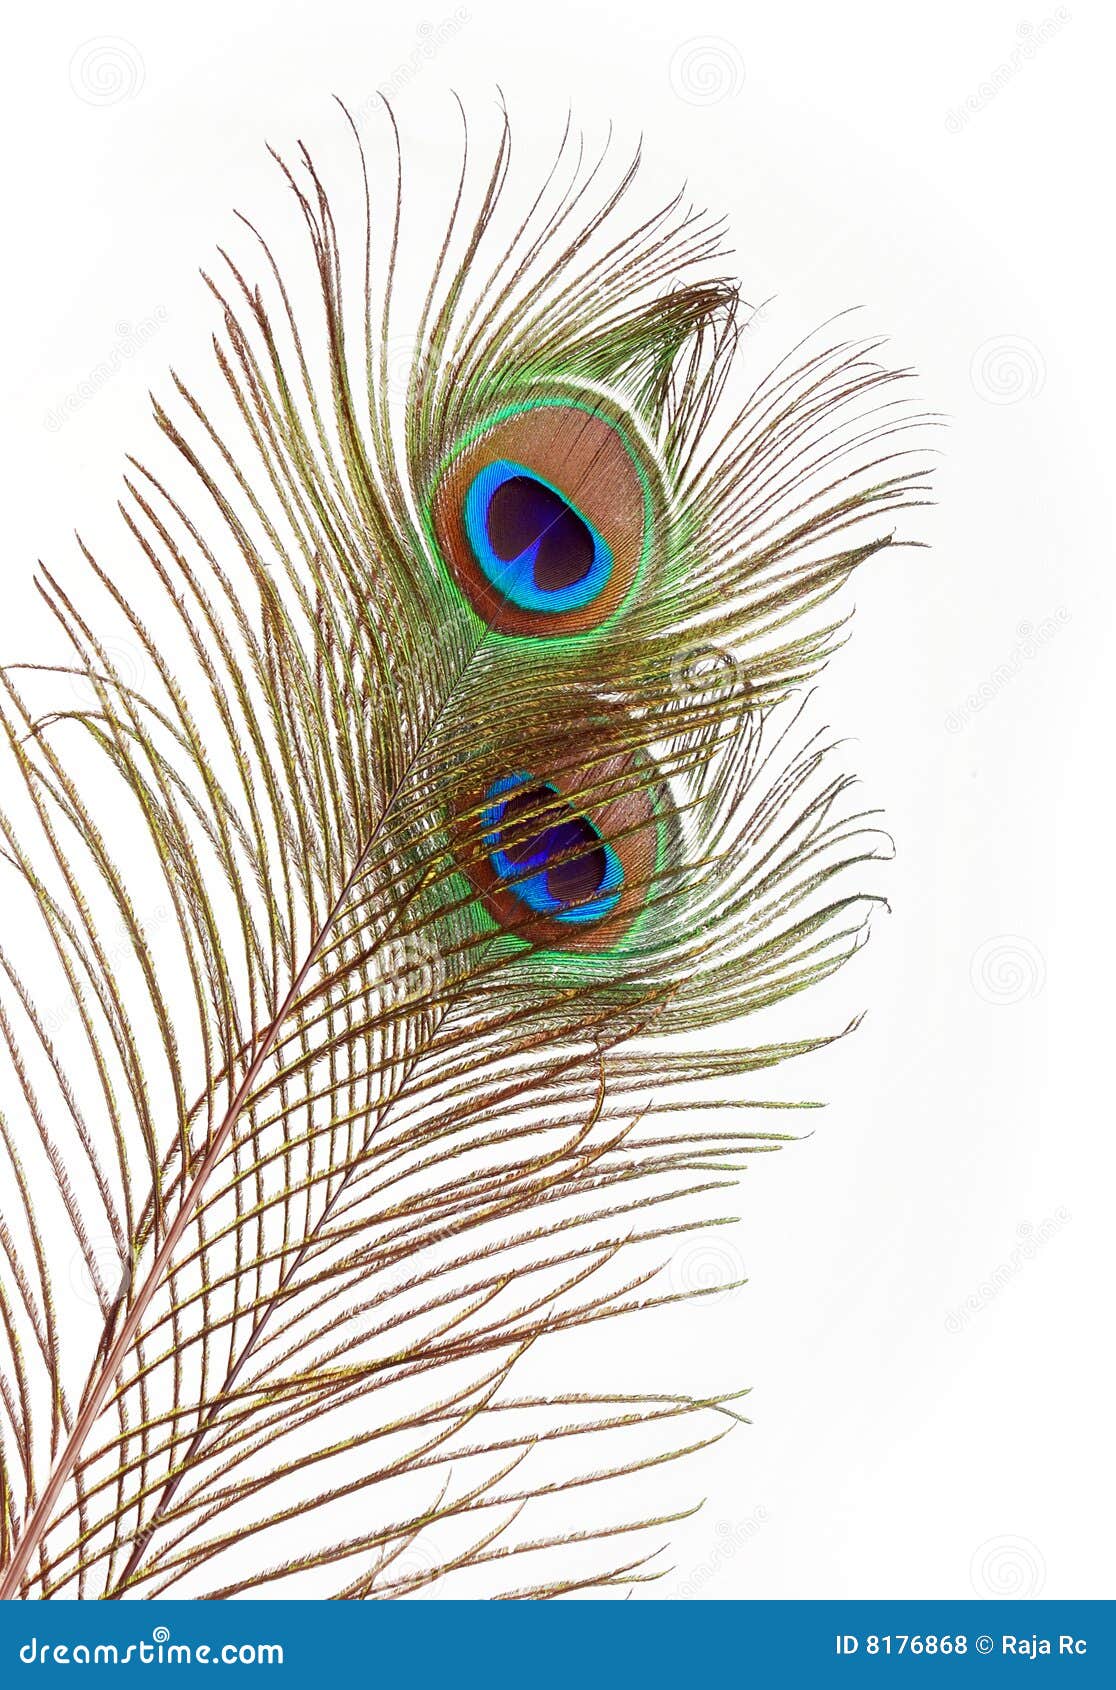 Peacock feather eye stock photo. Image of nature, bright - 8176868